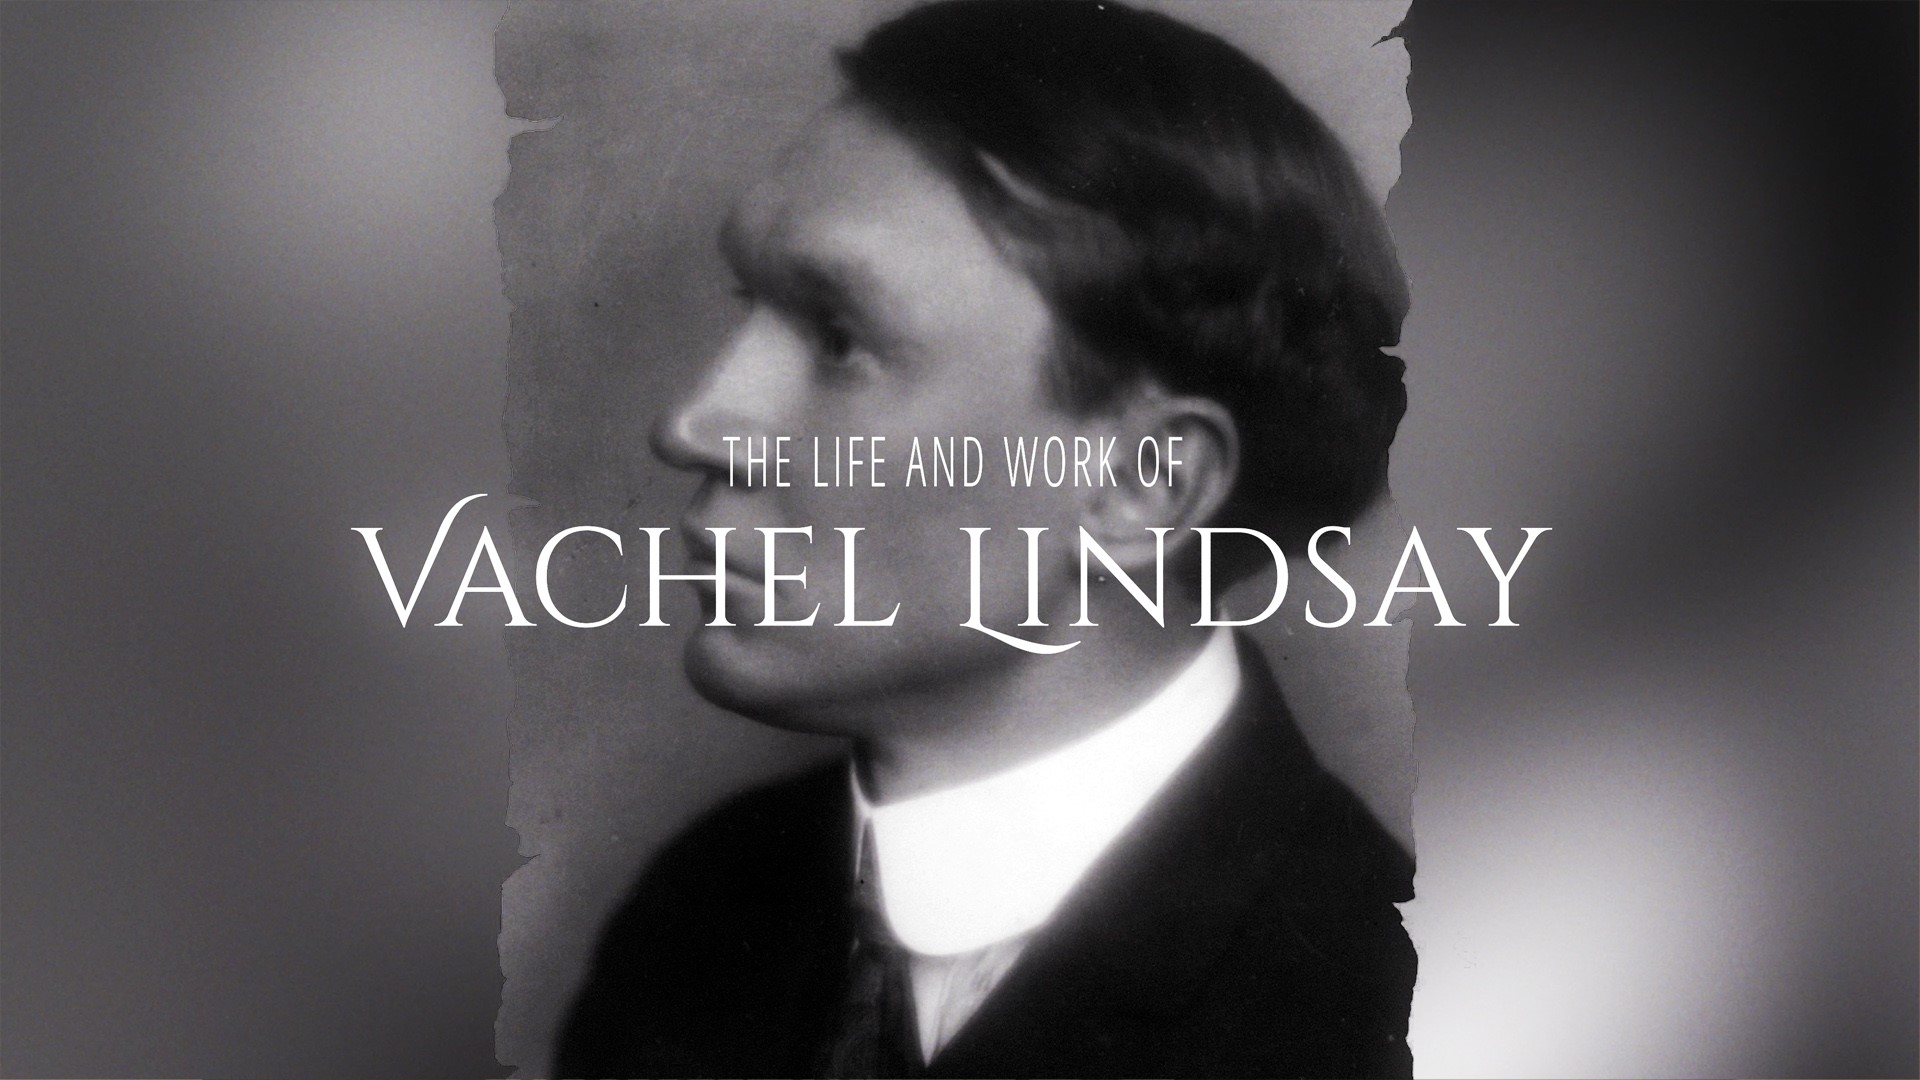 The life and work of Vachel Lindsay